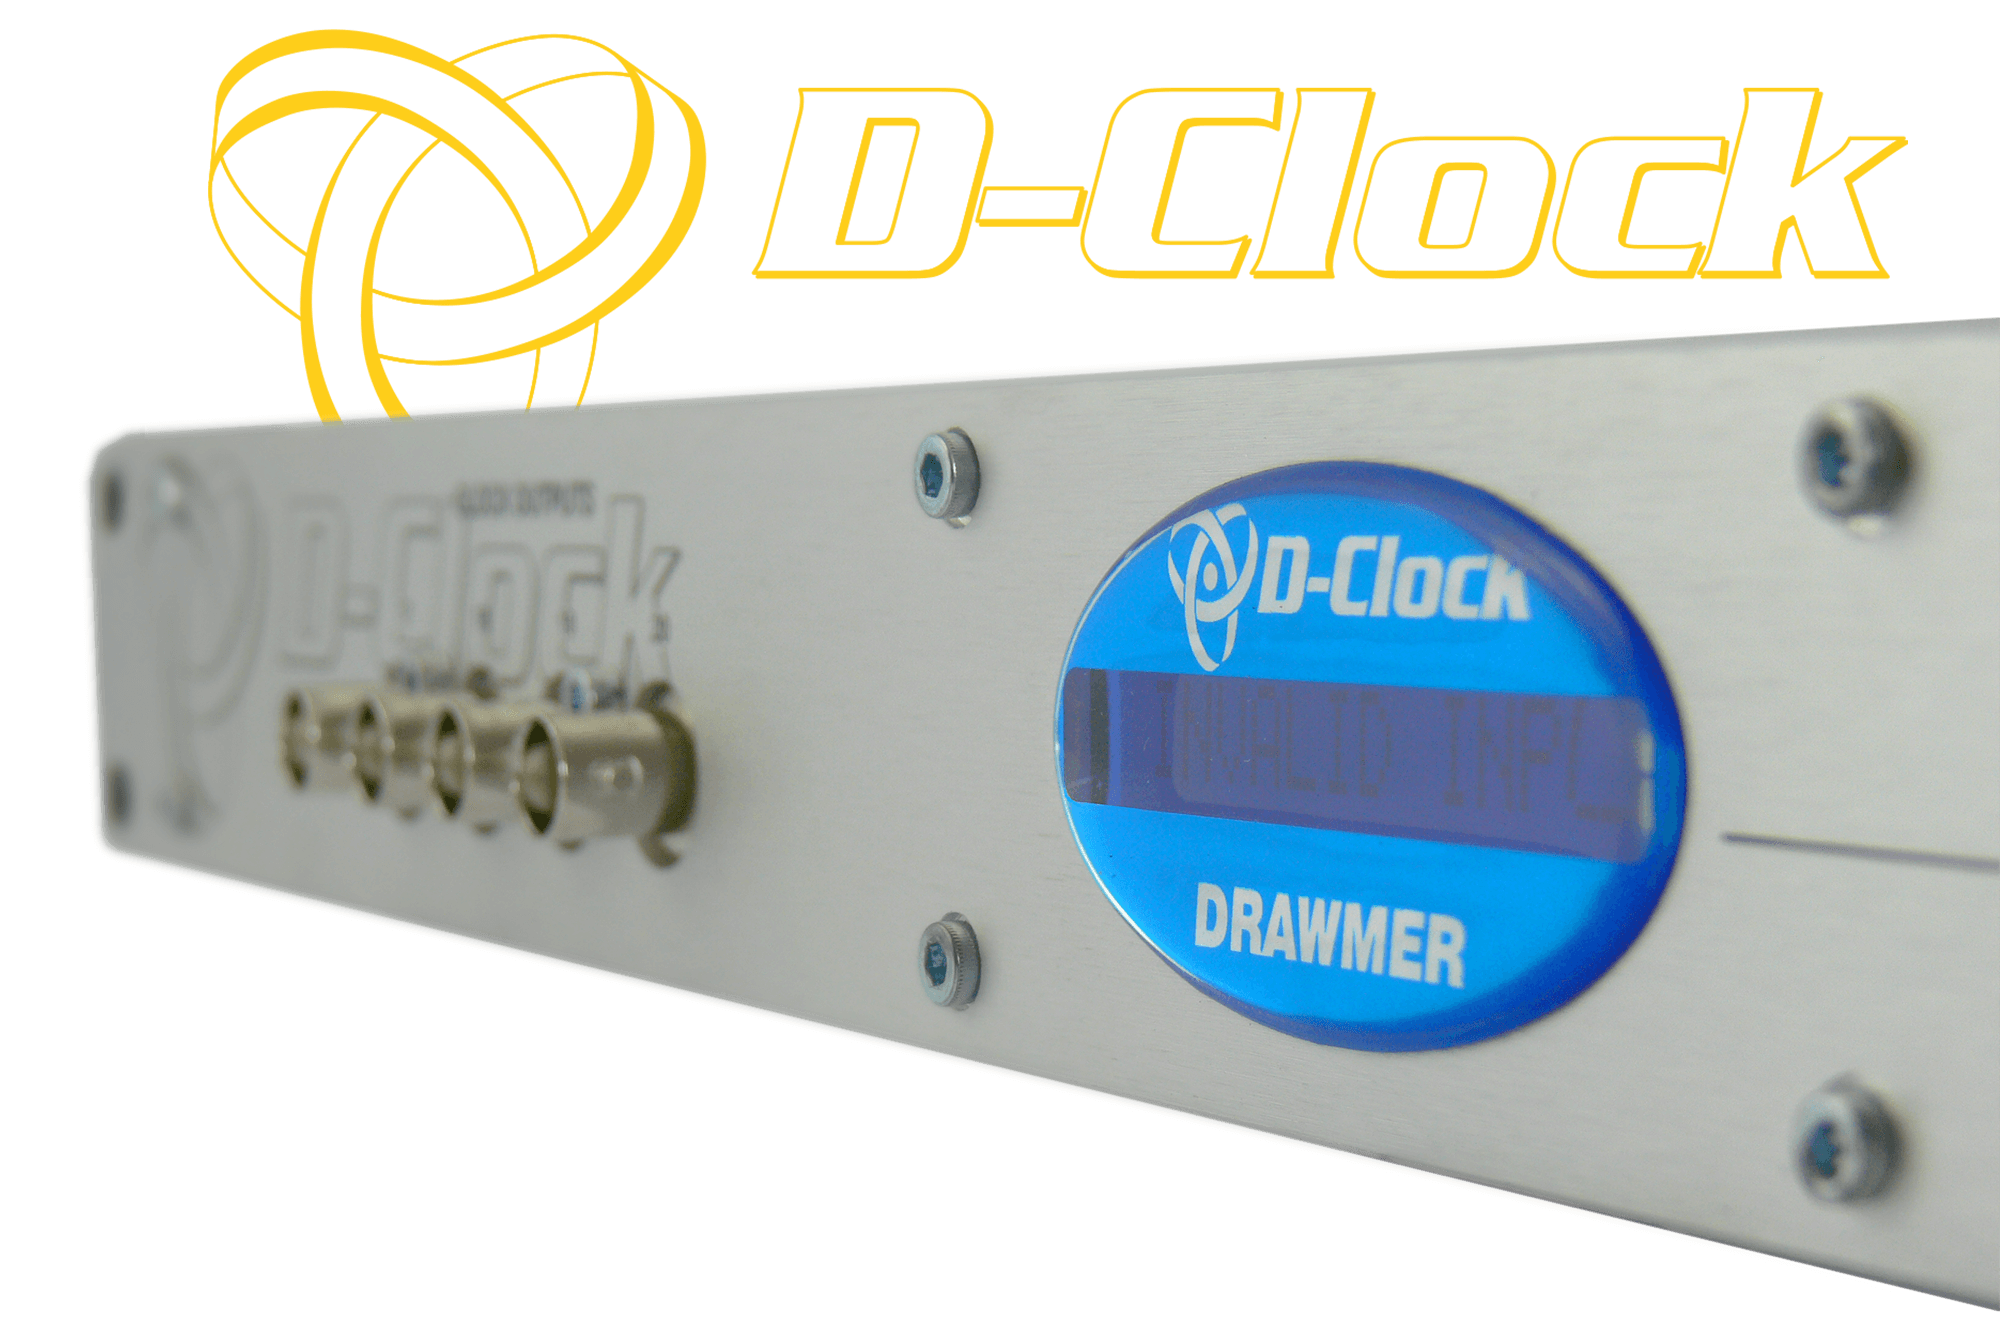 Close up of the D-Clock cental display with the logo above in yellow